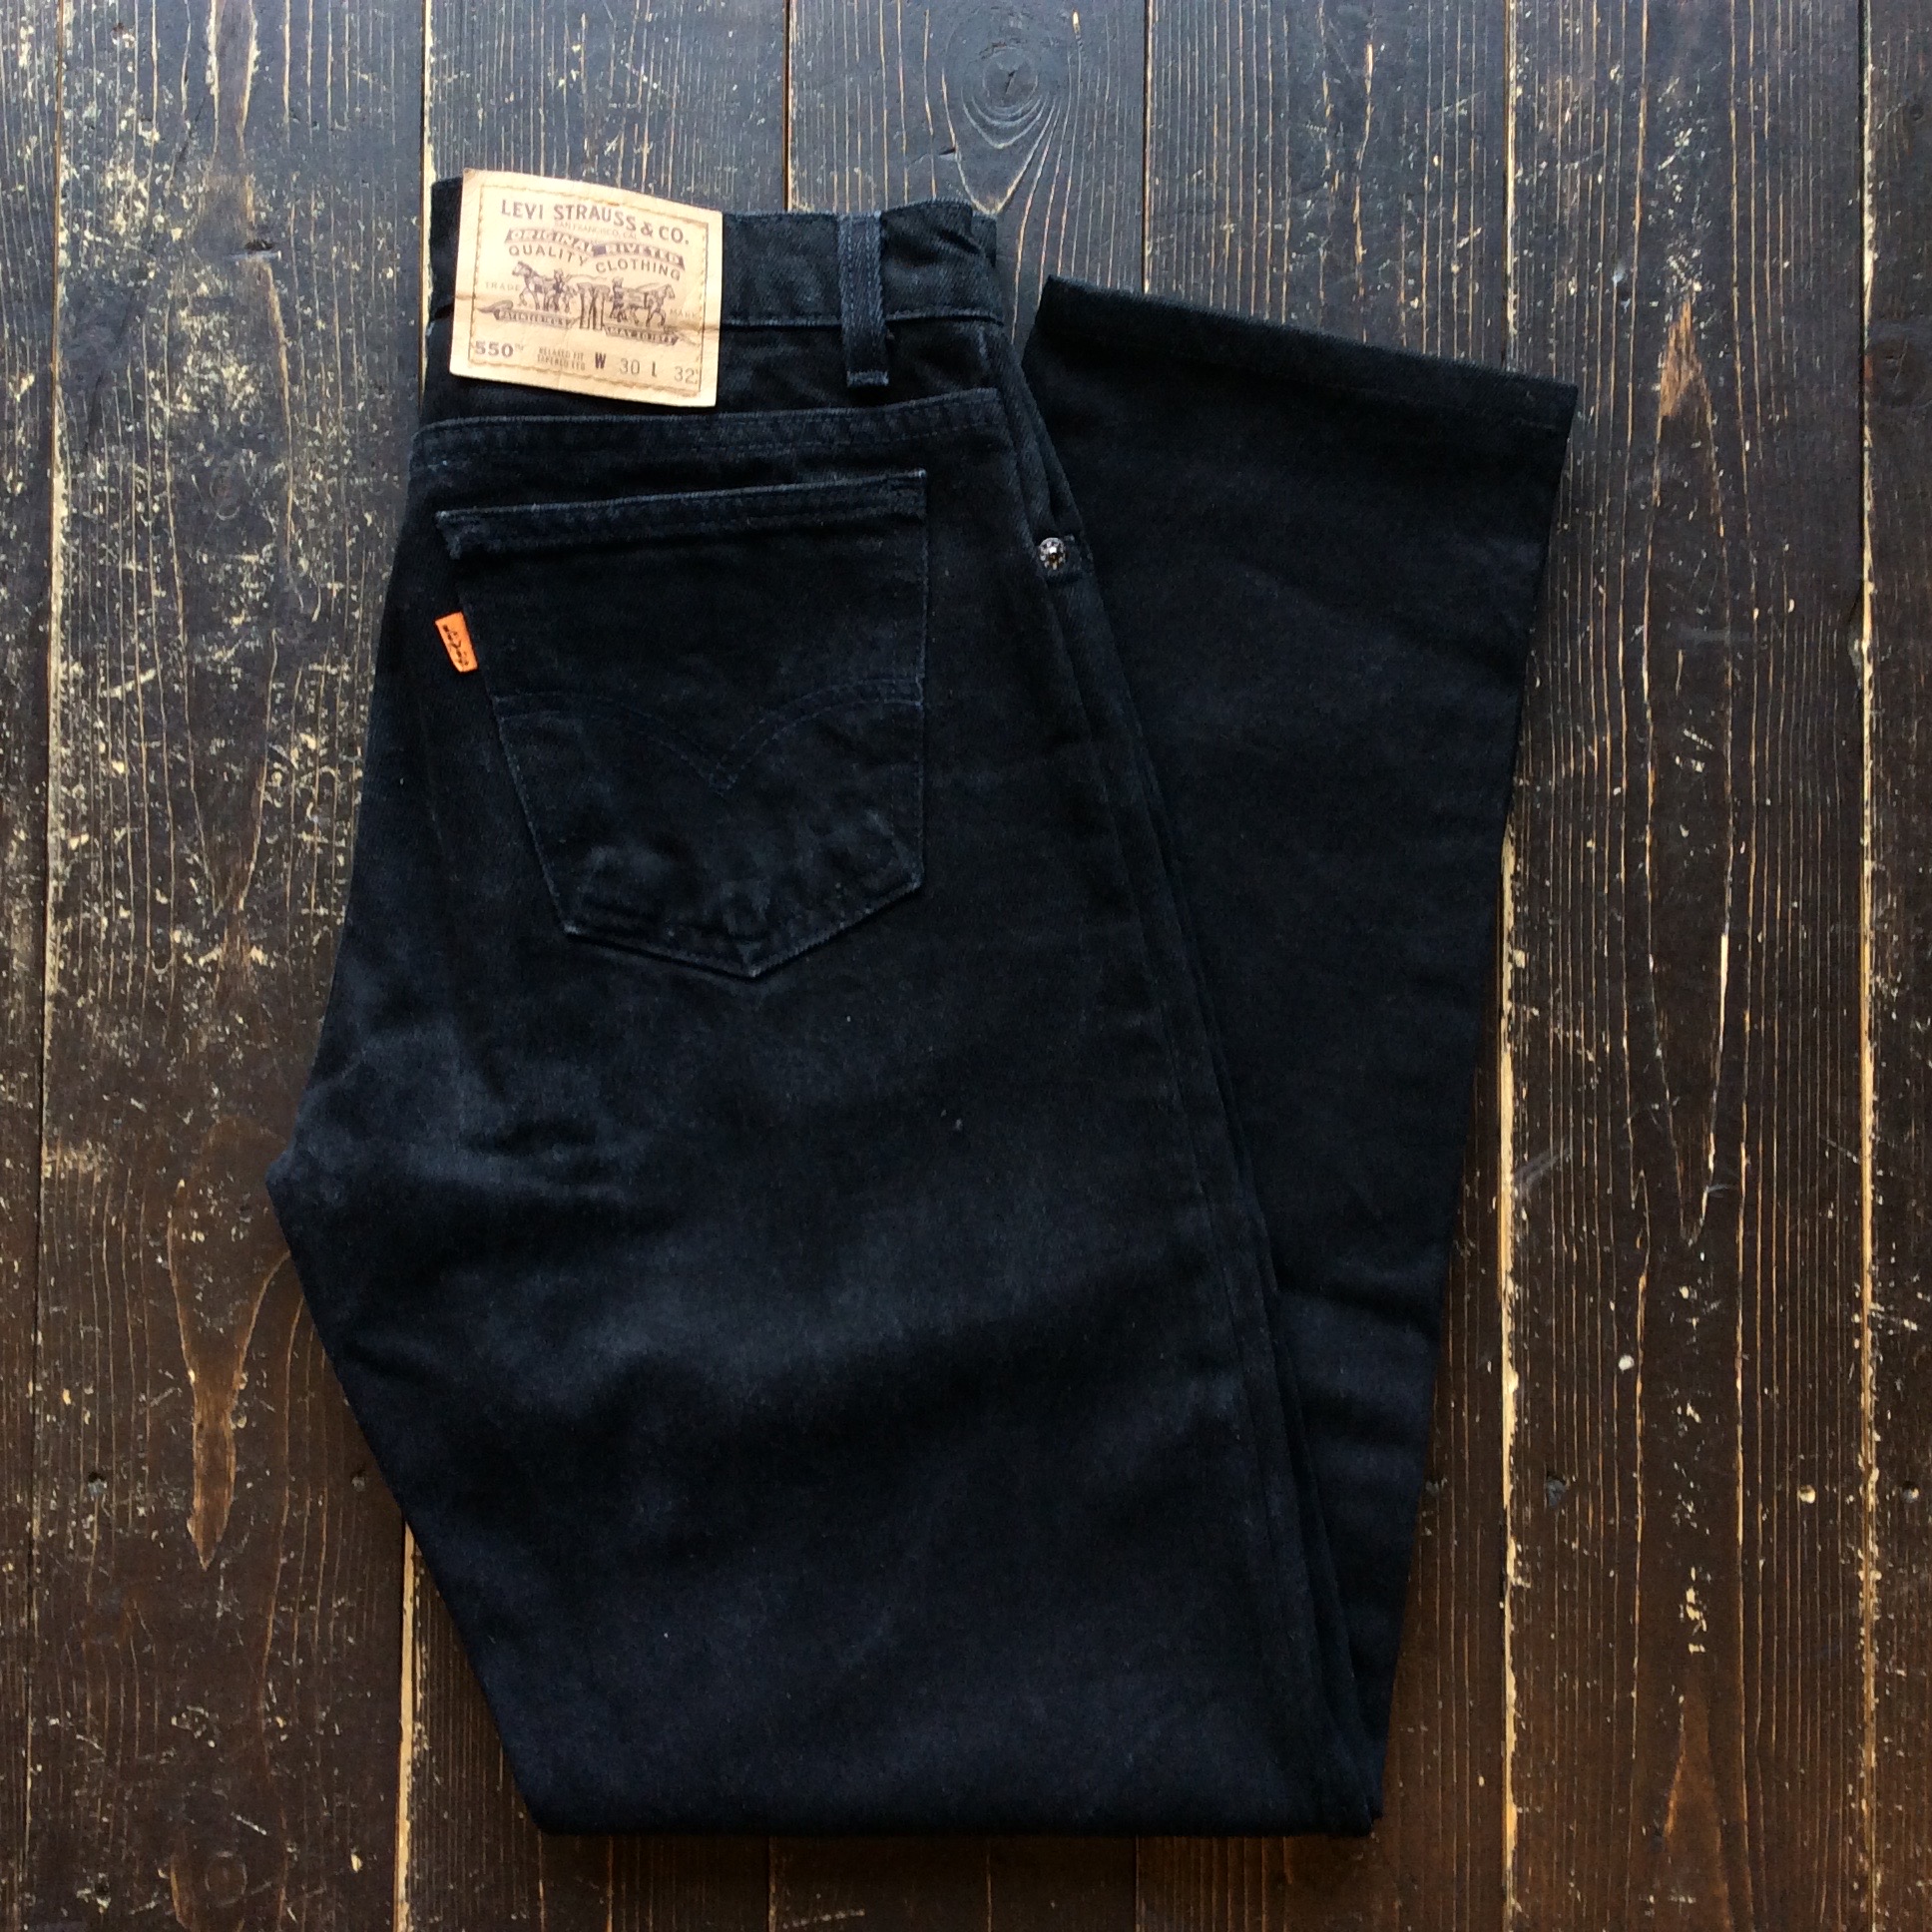 90's Levi's 550 black made in U.S.A. | Button Up Clothing